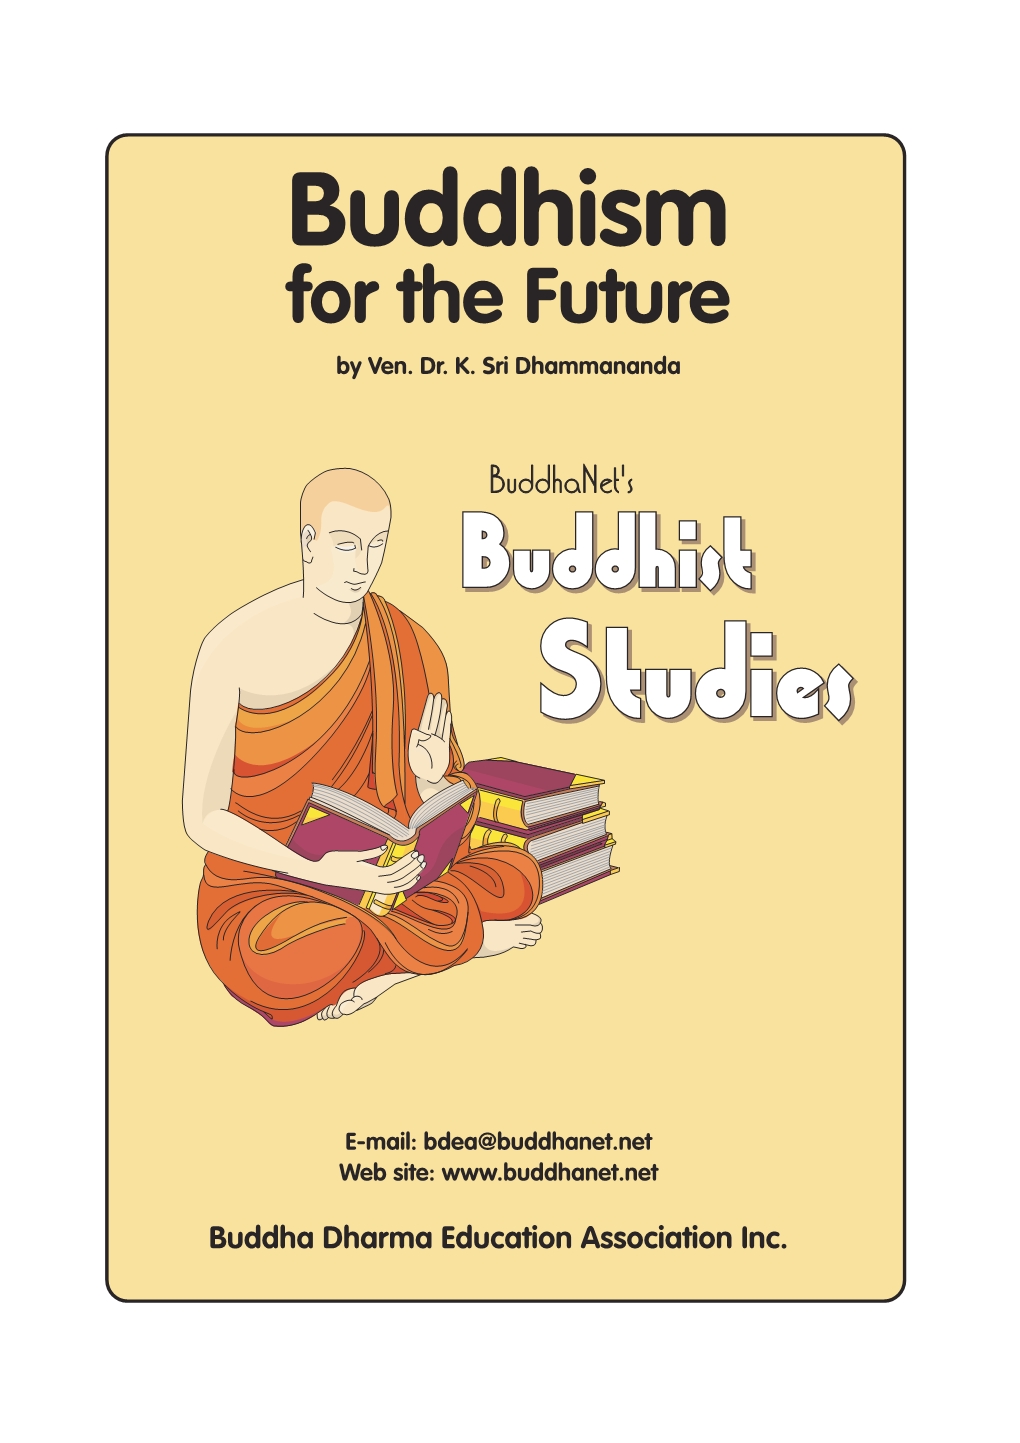 Buddhism for the Future by Ven